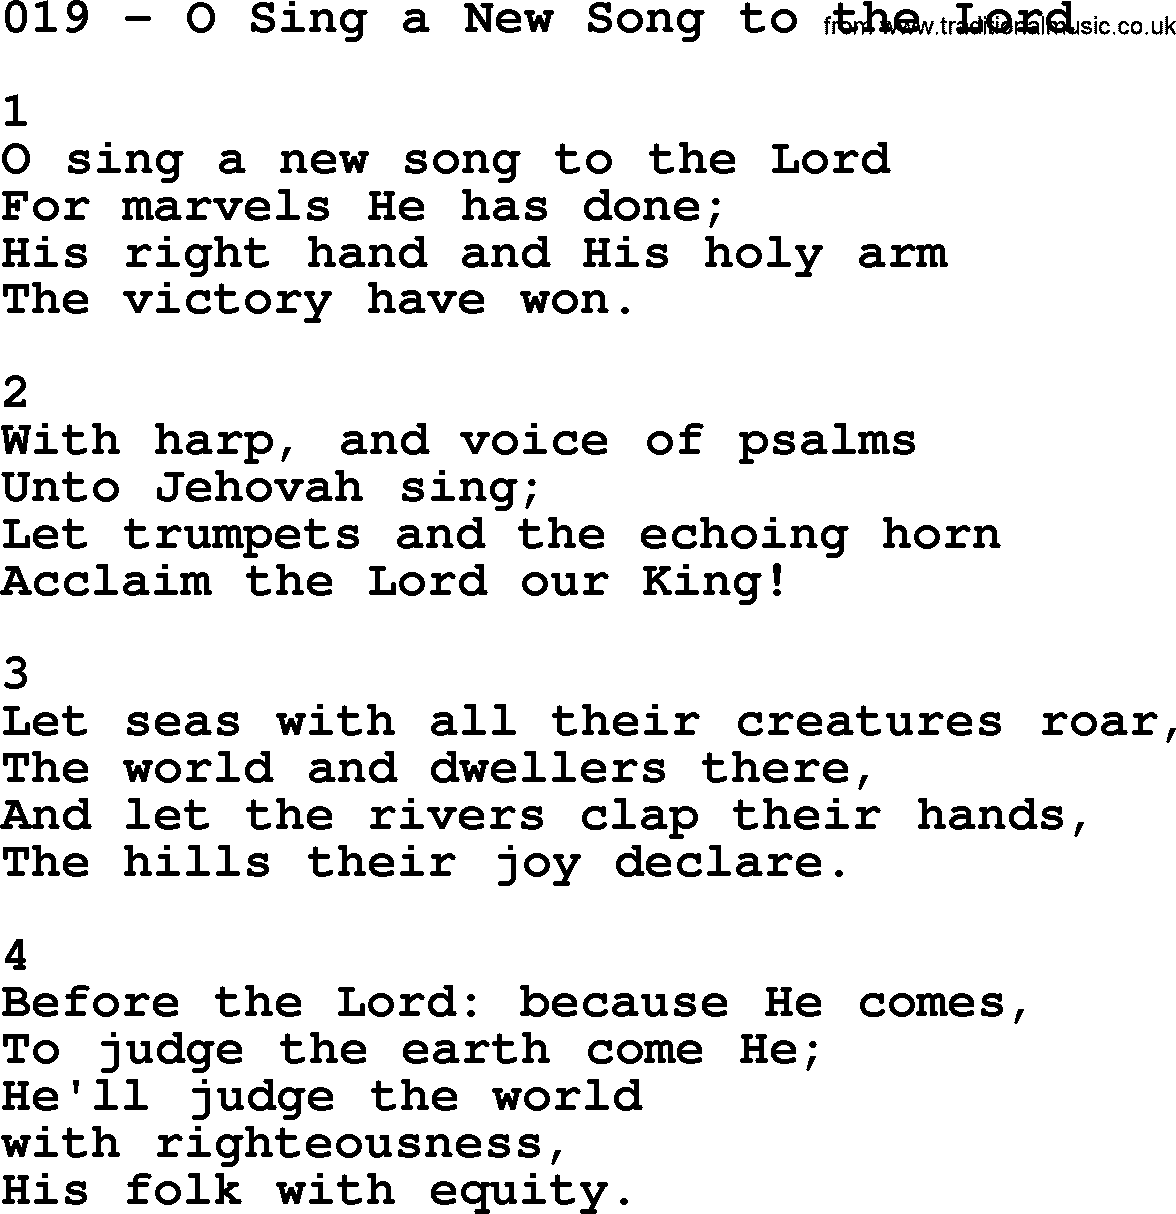 Complete Adventis Hymnal, title: 019-O Sing A New Song To The Lord, with lyrics, midi, mp3, powerpoints(PPT) and PDF,